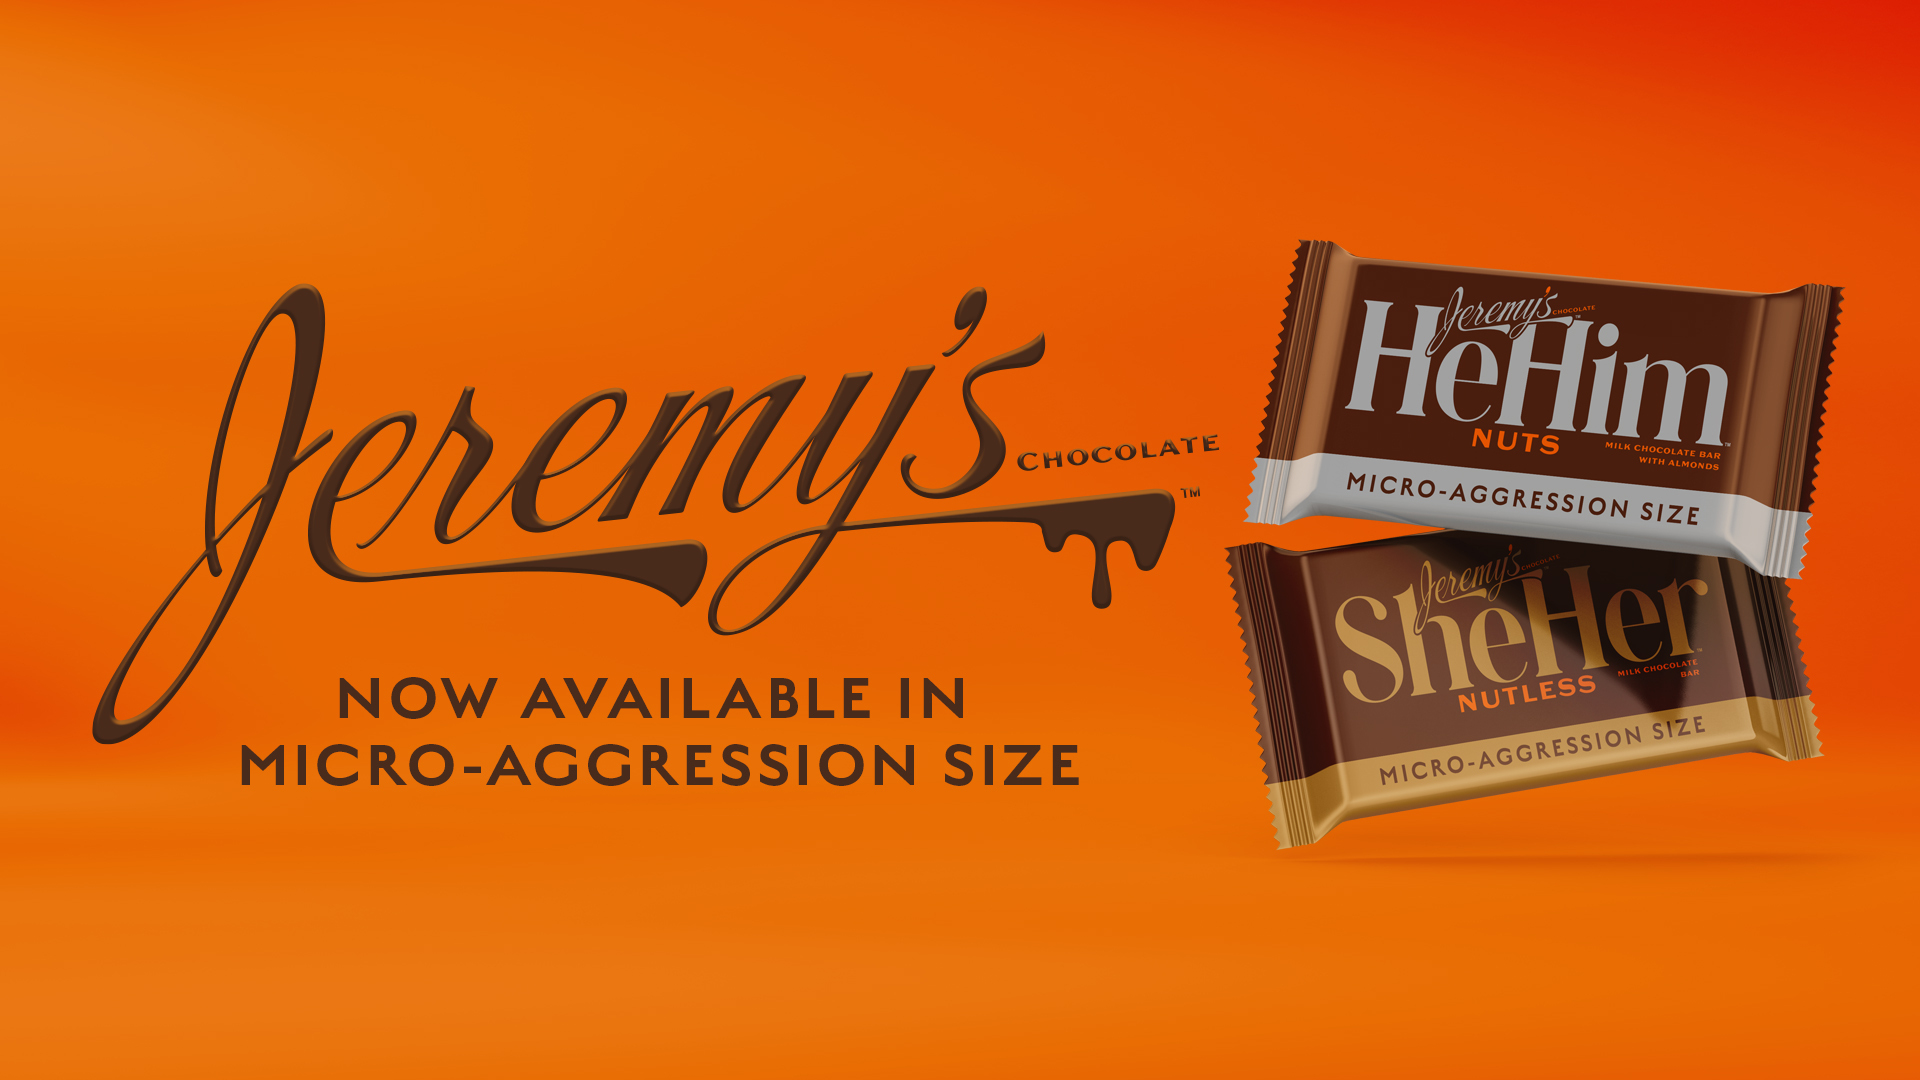 Daily Wire introduces Jeremy’s Chocolate in “micro-aggression” size.